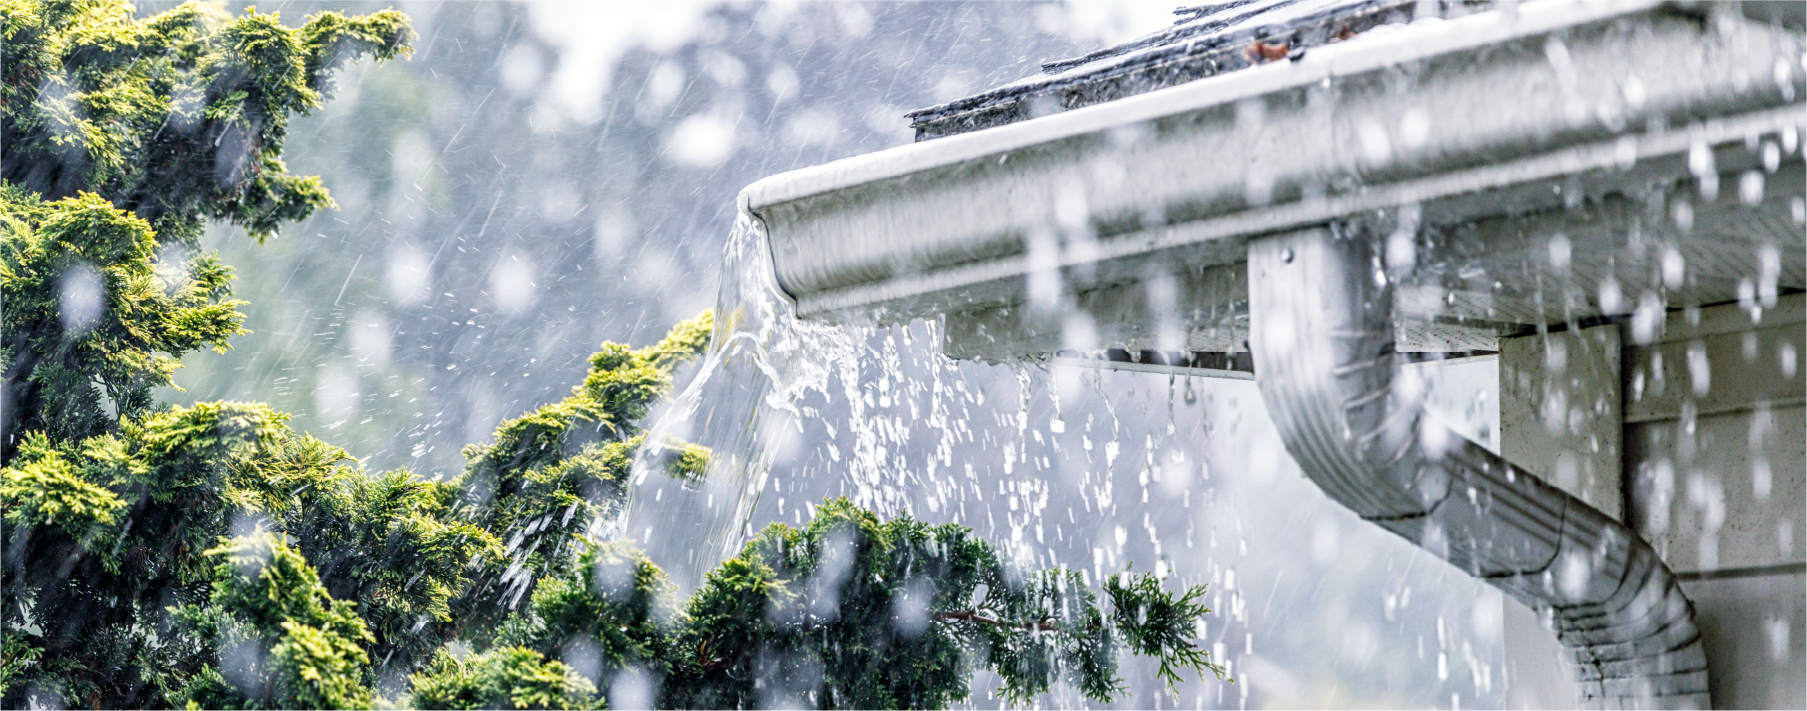 Image of the corner of a roof of a house during a rainstorm with water splashing out of a gutter